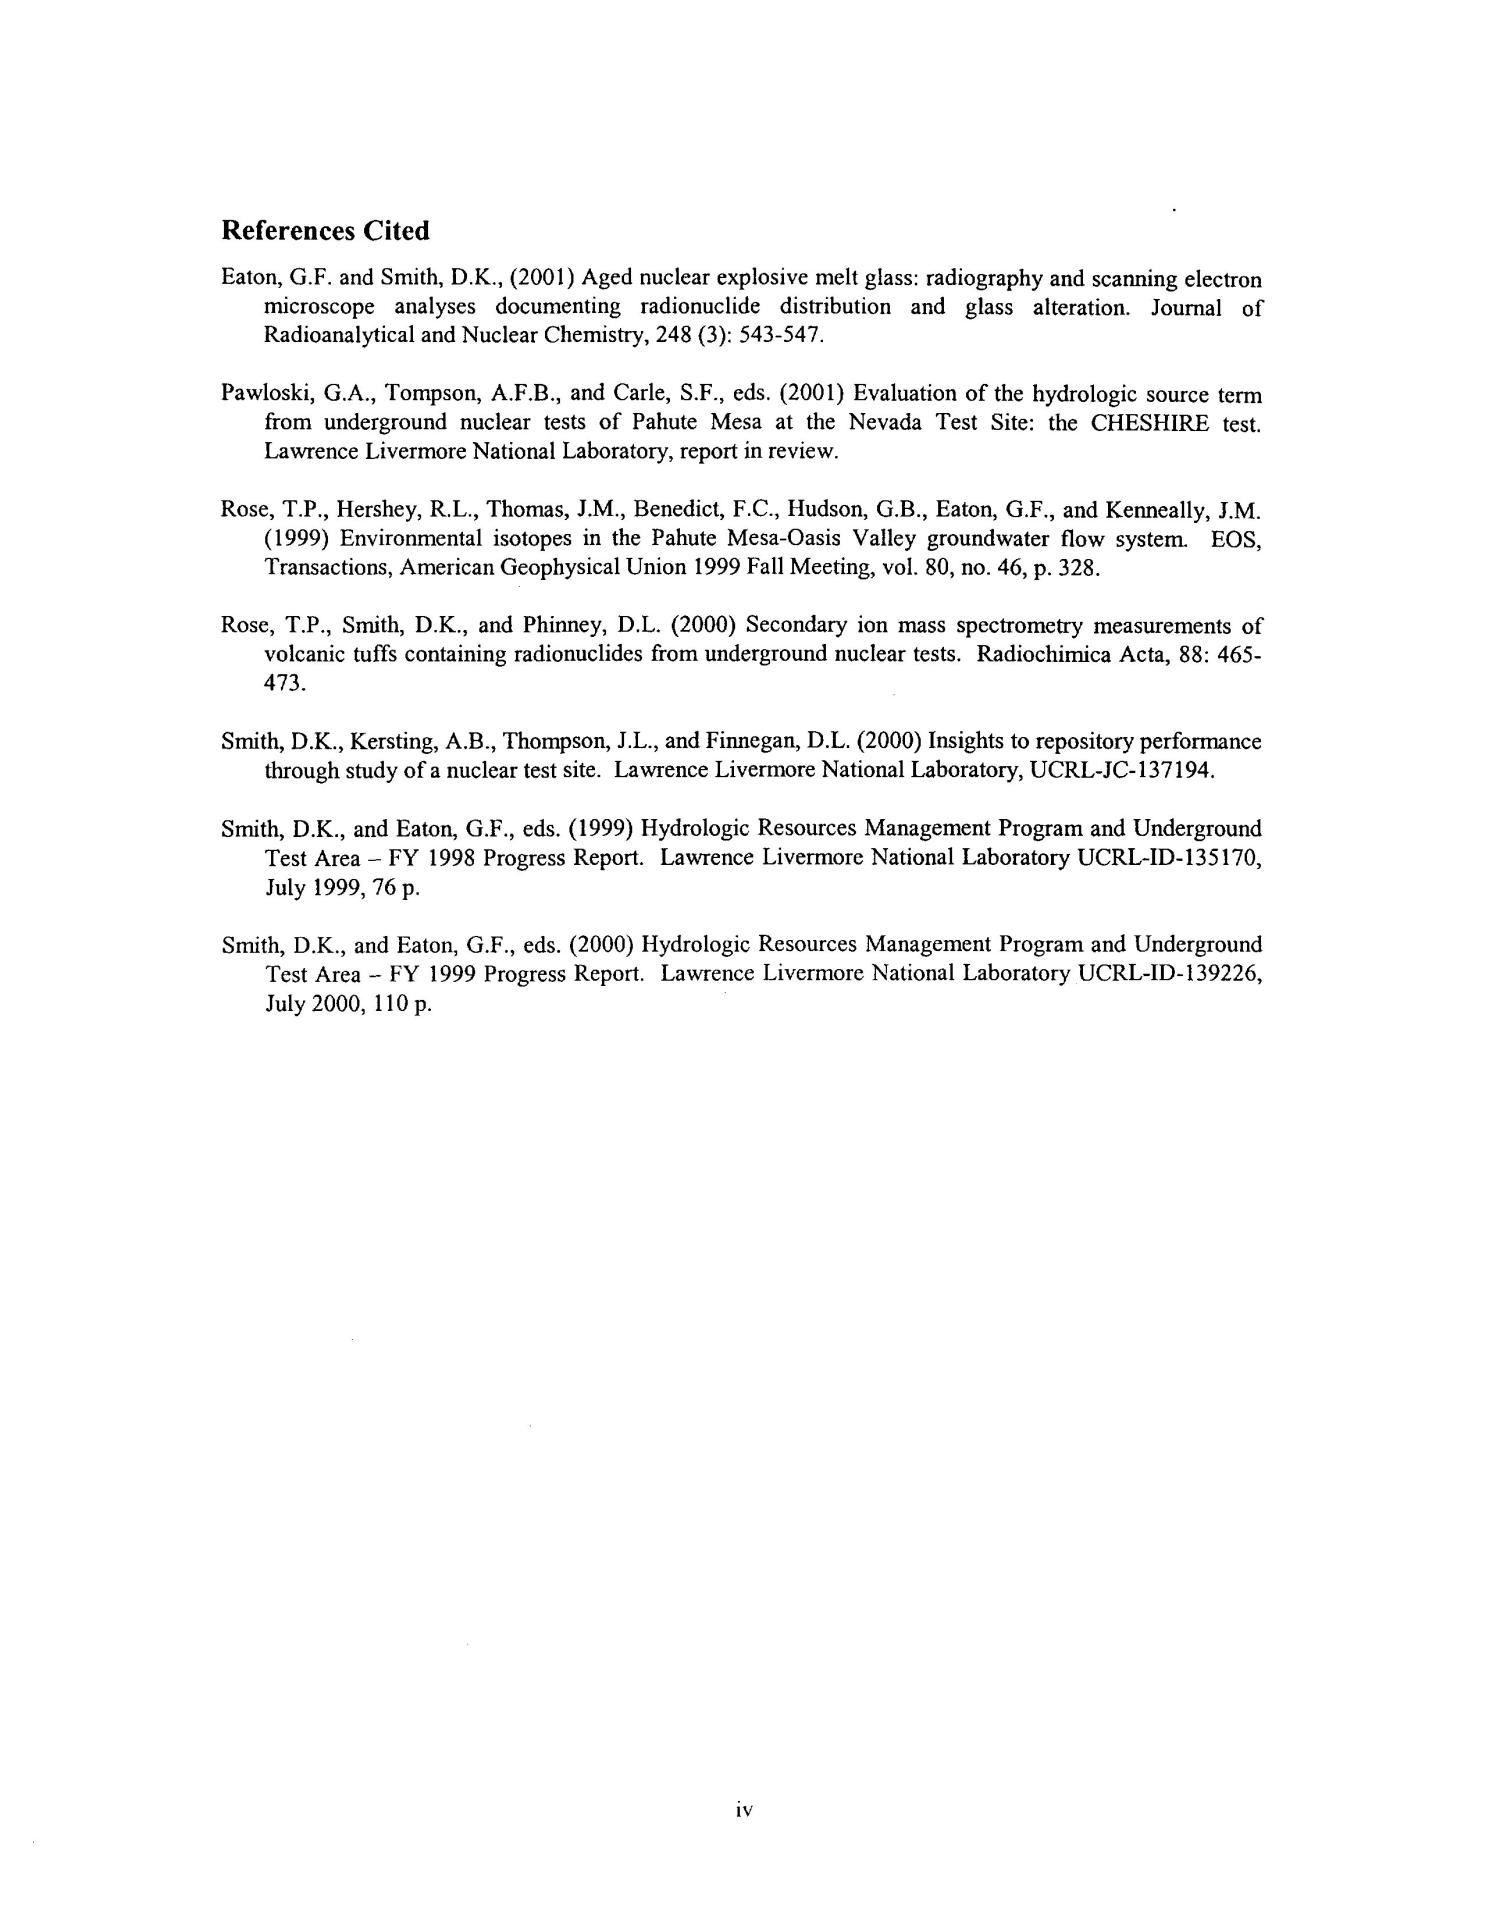 Hydrologic Resources Management Program and Underground Test Area Project FY 2000 Progress Report
                                                
                                                    [Sequence #]: 12 of 156
                                                